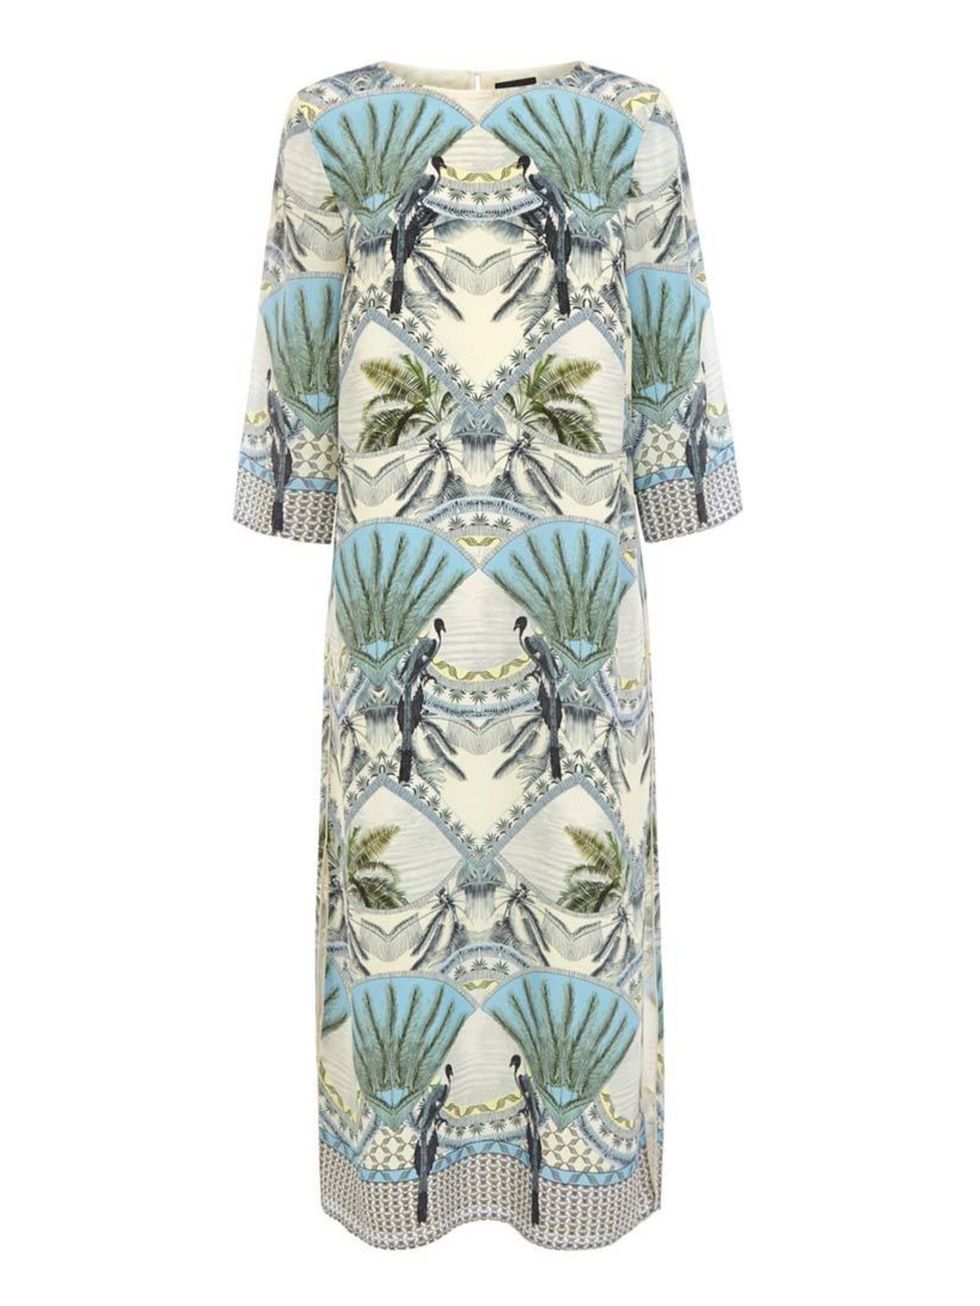 <p>Pair this printed silk dress with boxfresh white trainers on a sunny Saturday, or silver block heels to kick off <a href="http://www.elleuk.com/wedding">Wedding season</a>.</p>

<p><a href="http://www.warehouse.co.uk/colonial-silk-midi-dress/all/wareho